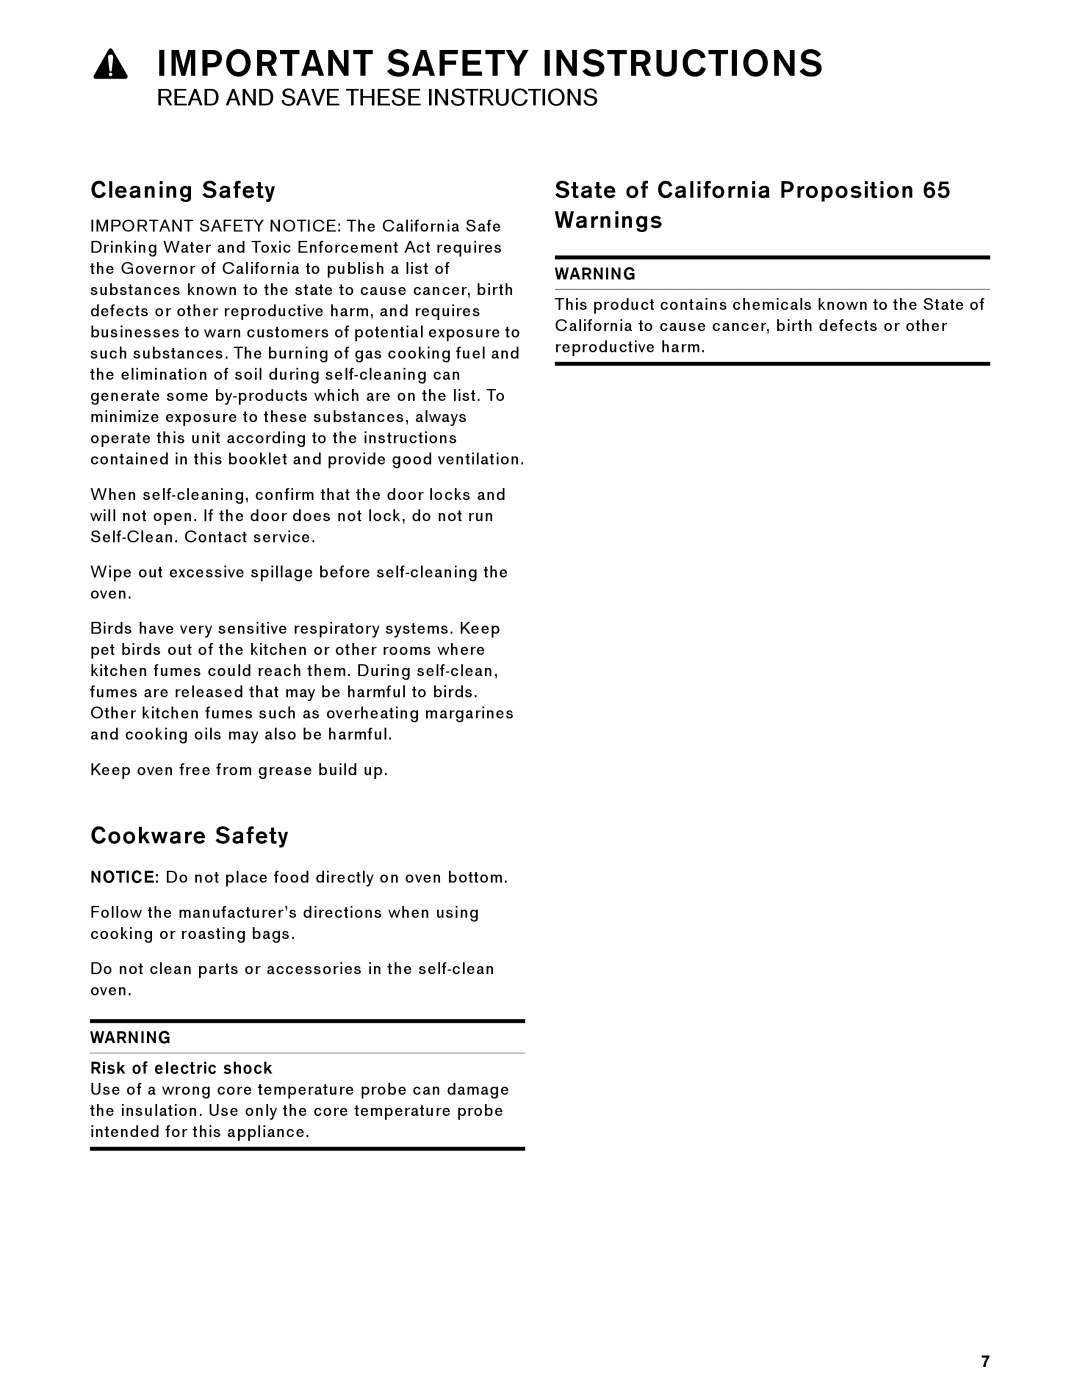 Gaggenau BX 480/481 610 manual Cleaning Safety, State of California Proposition 65 Warnings, Cookware Safety 